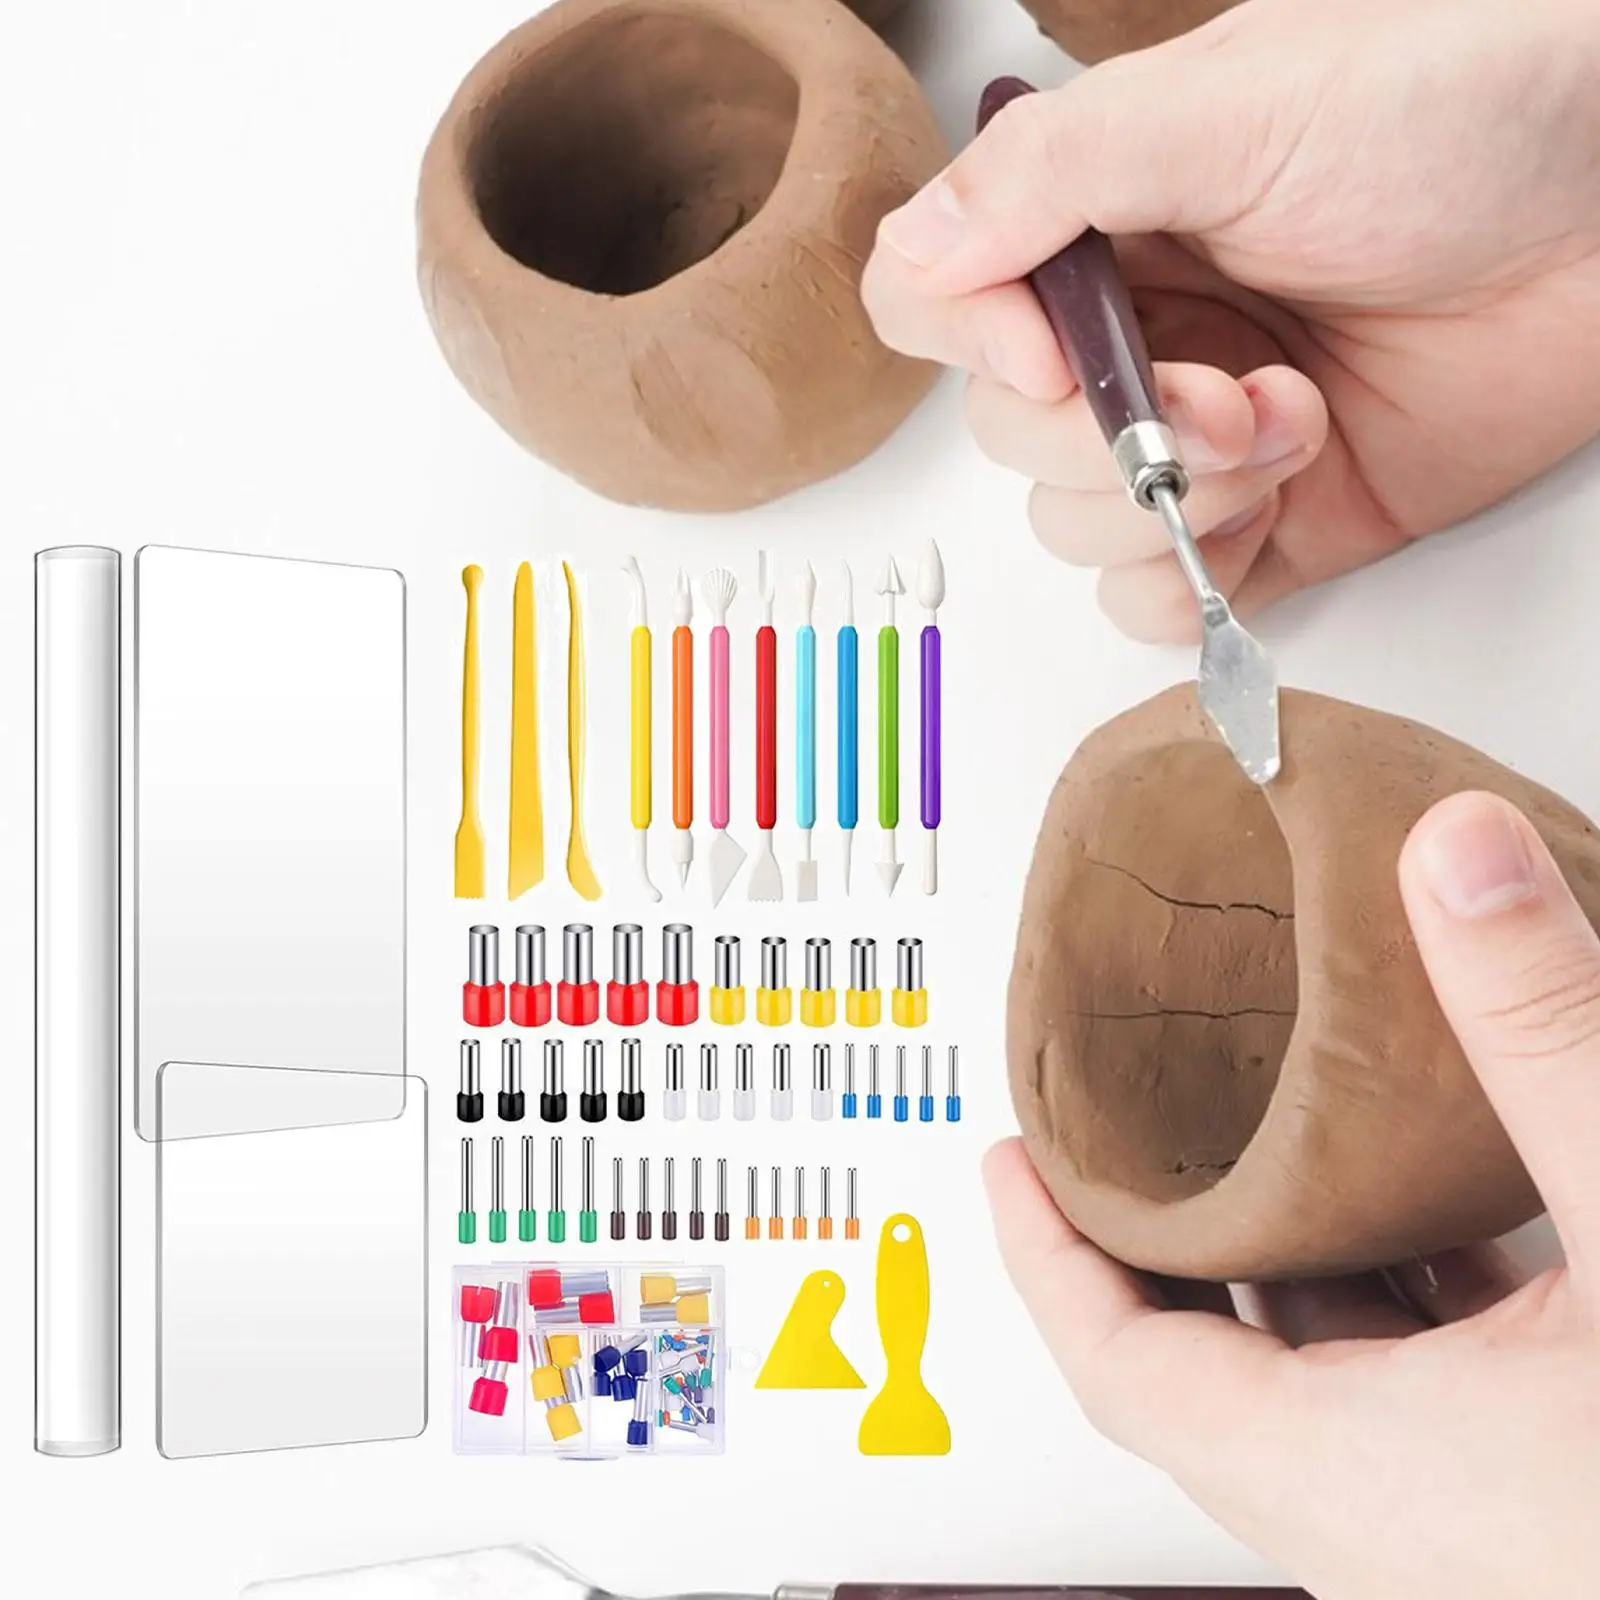 56x Polymer Clay Tools DIY Clay Tools Ceramic Clay Carving Tool Set for Crafts, Trimming, Engraving DIY Handicraft Professionals